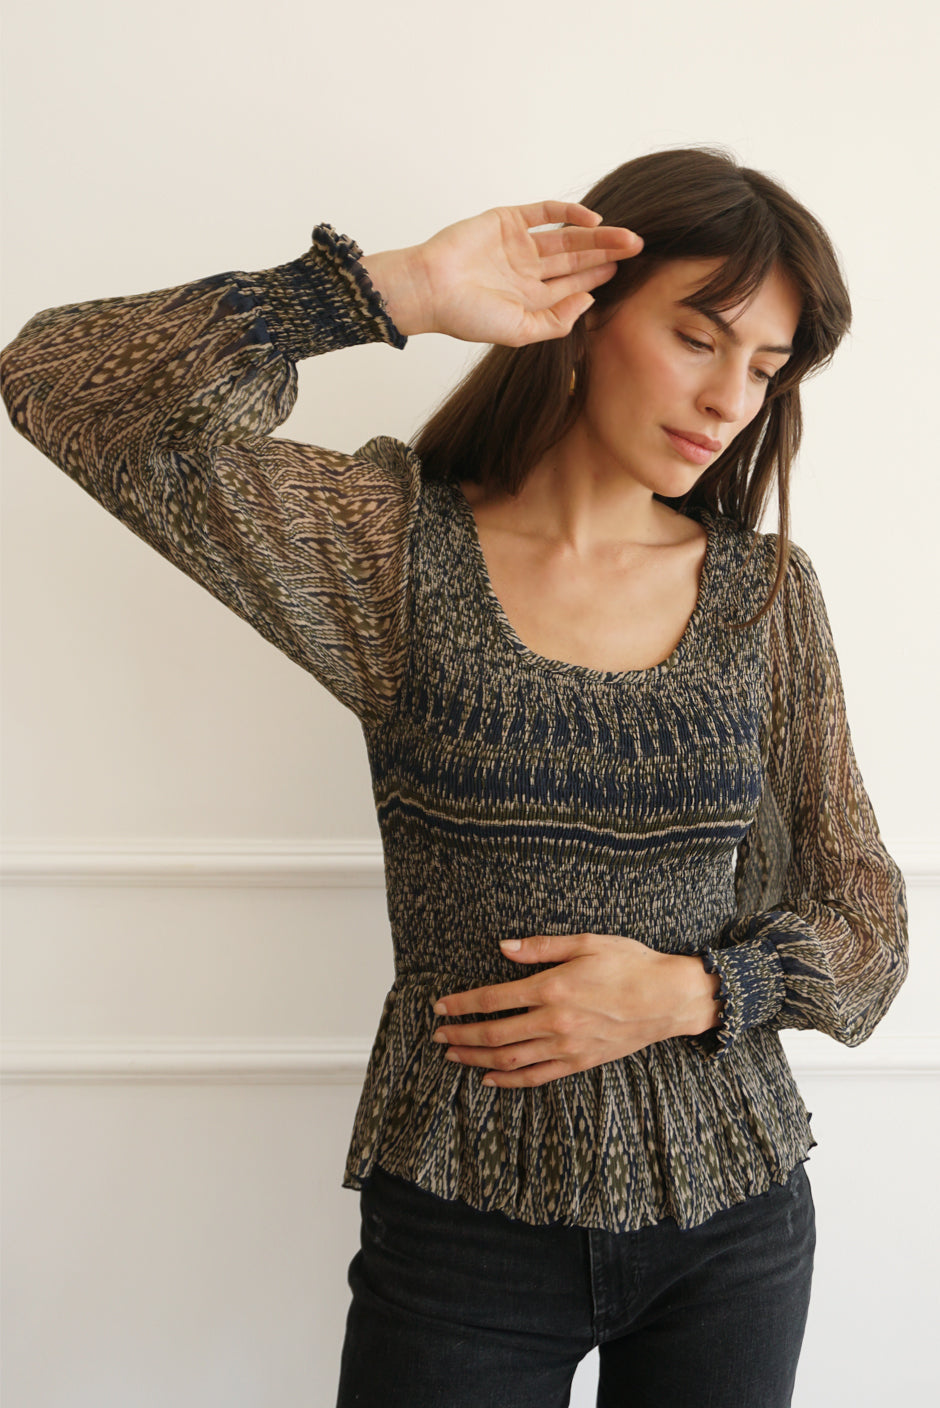 Sustainable & Ethical Women's Tops in Luxurious Fabrics - Paneros Clothing